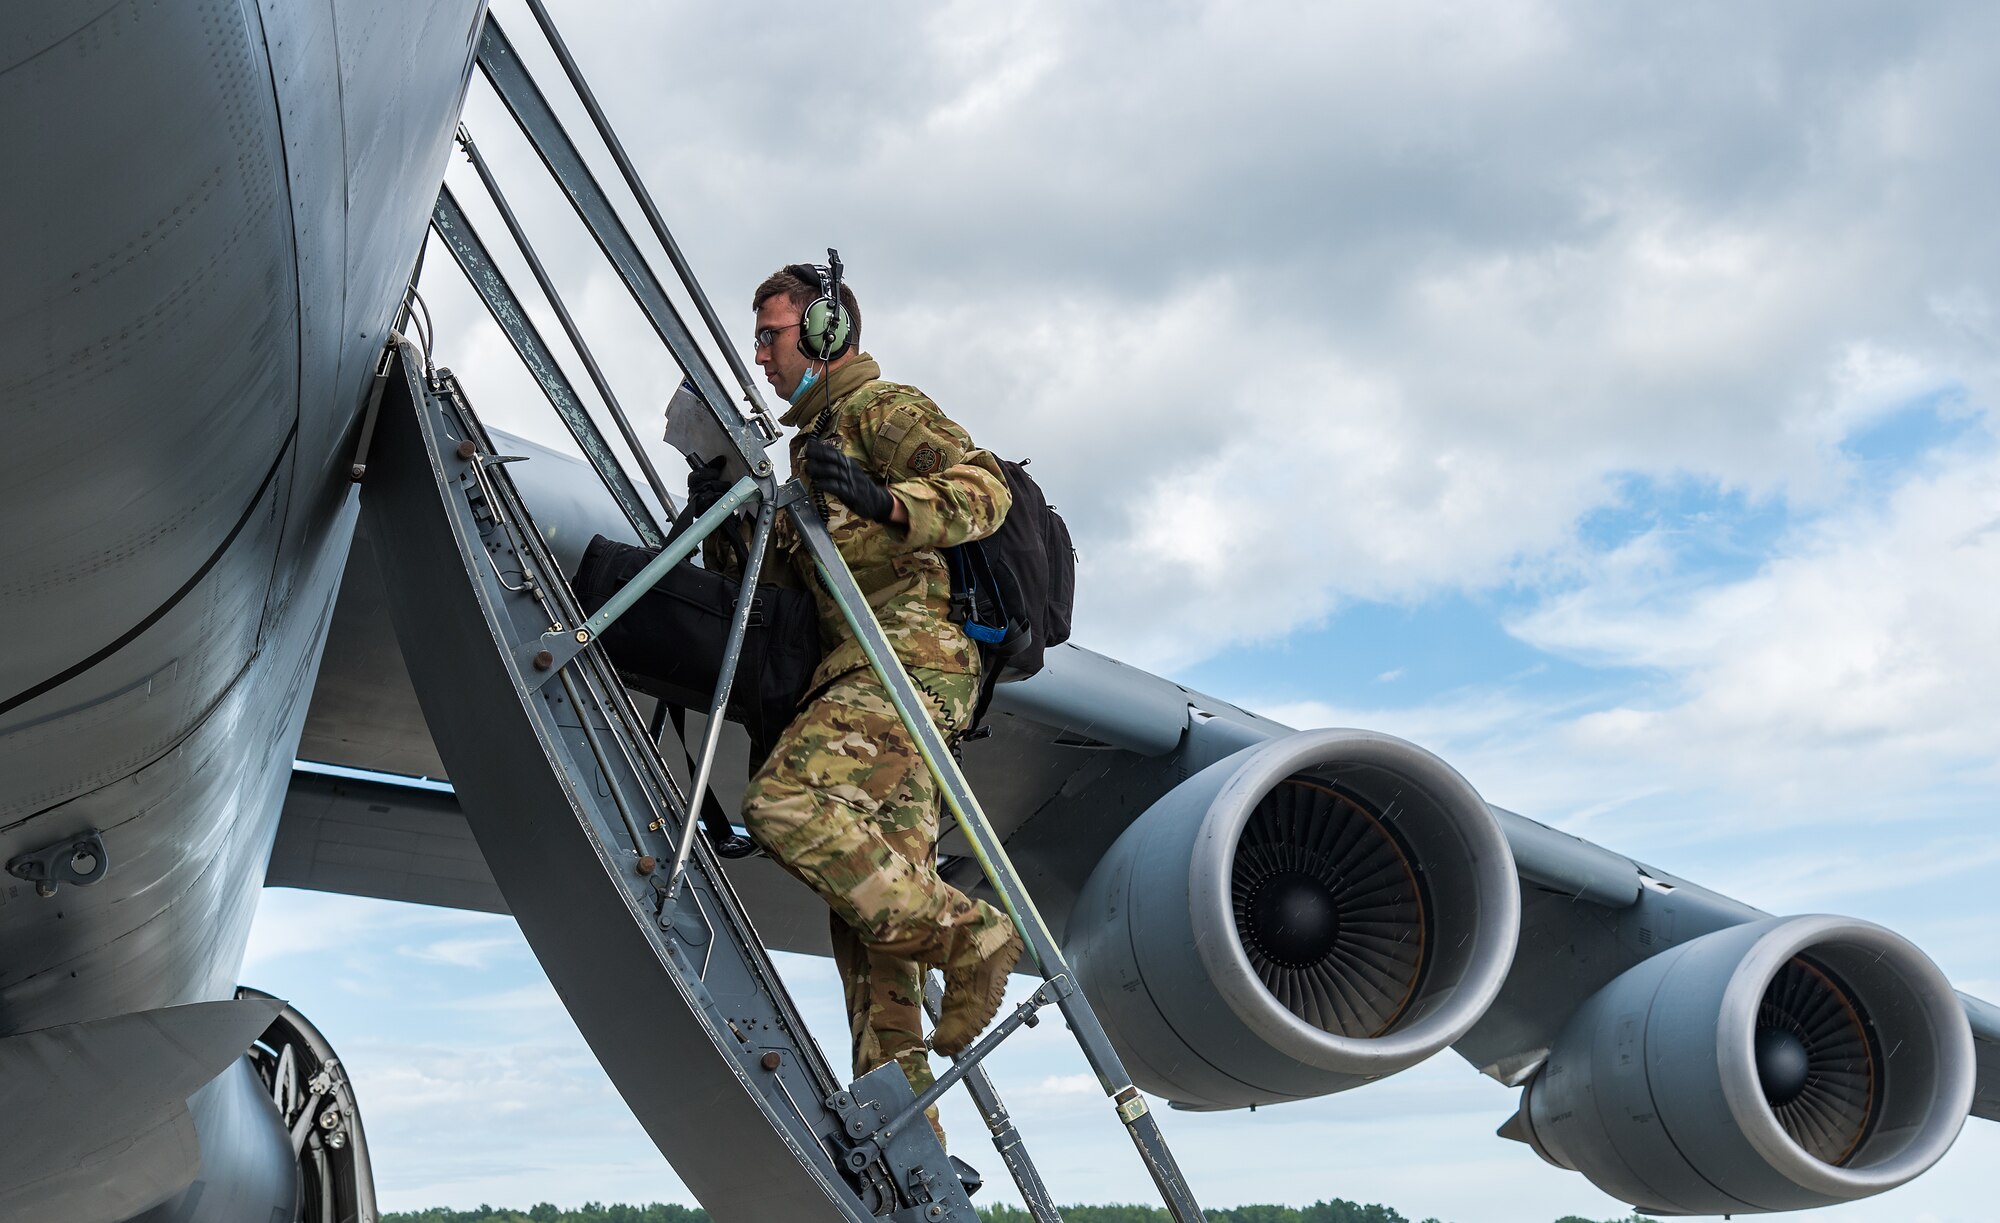 Staff Sgt. Broden McDonald, 9th Airlift Squadron flight engineer, climbs up to the crew entrance door of a C-5M Super Galaxy at Dover Air Force Base, Delaware, Aug. 18, 2021. The C-5M is a strategic transport aircraft and is the largest aircraft in the U.S. Air Force inventory. (U.S. Air Force photo by Roland Balik)